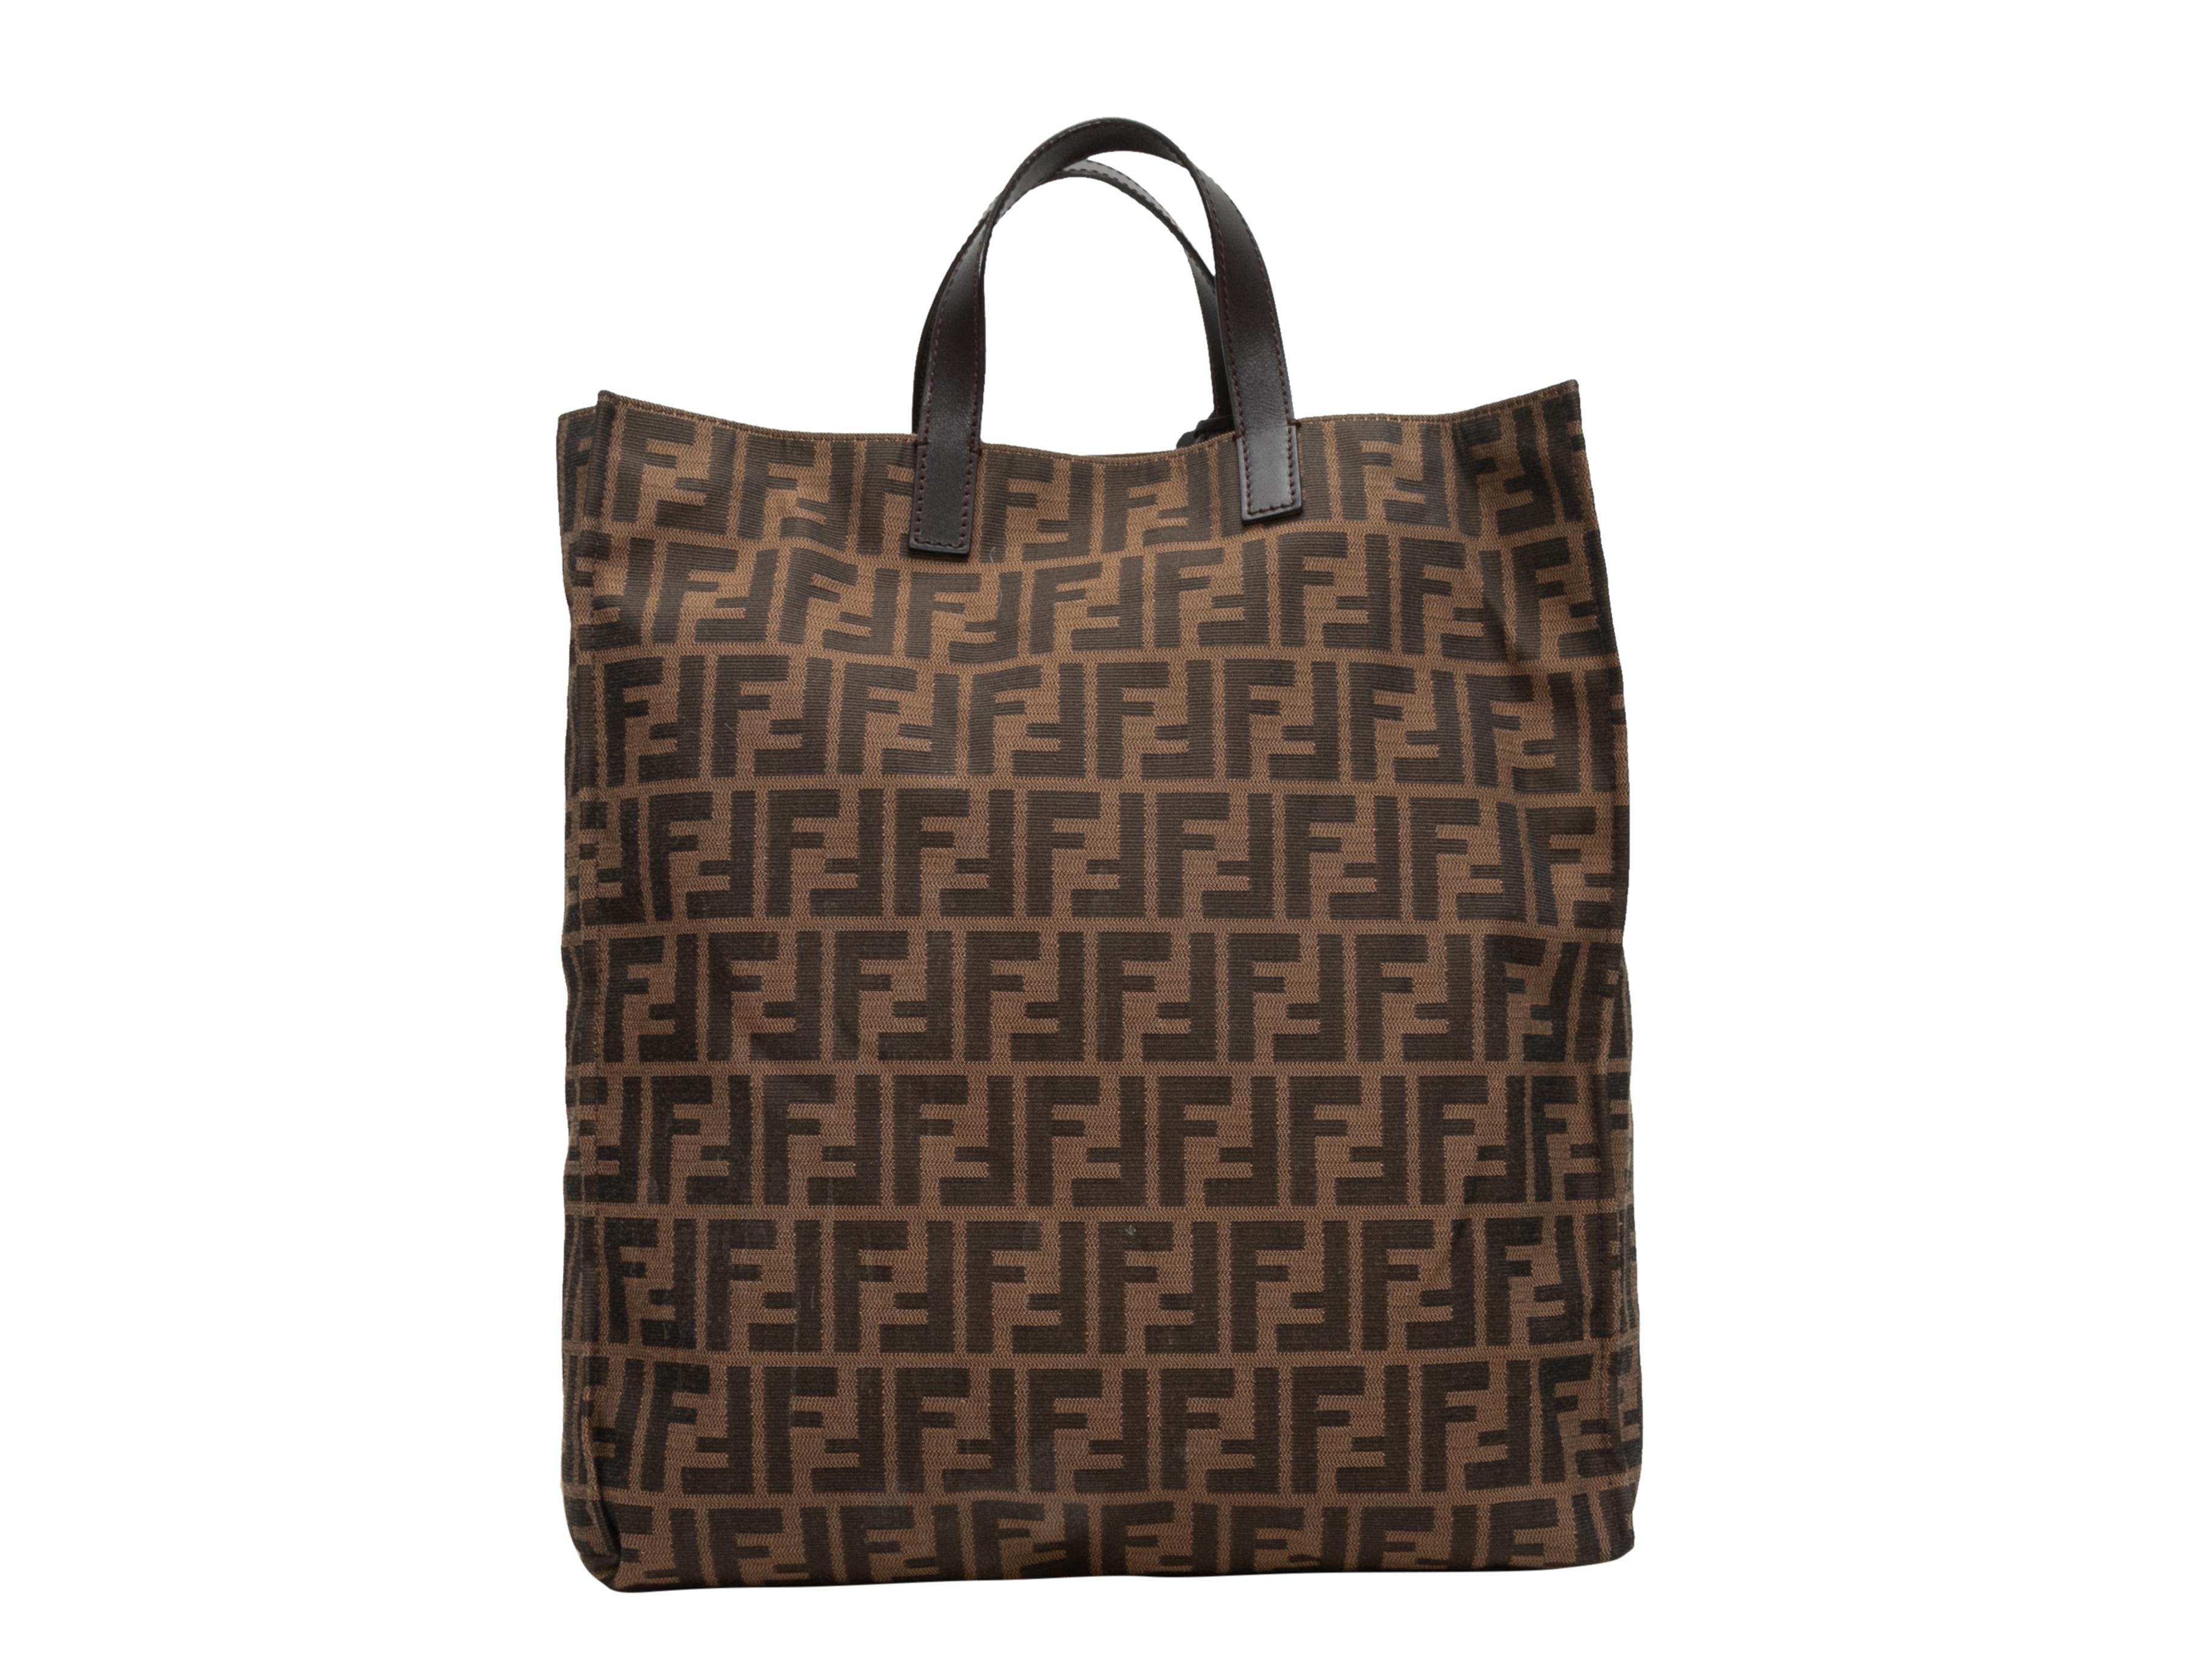 Brown Fendi Zucca Canvas Tote Bag. This tote bag features a Zucca canvas body and dual flat leather top handles. 13